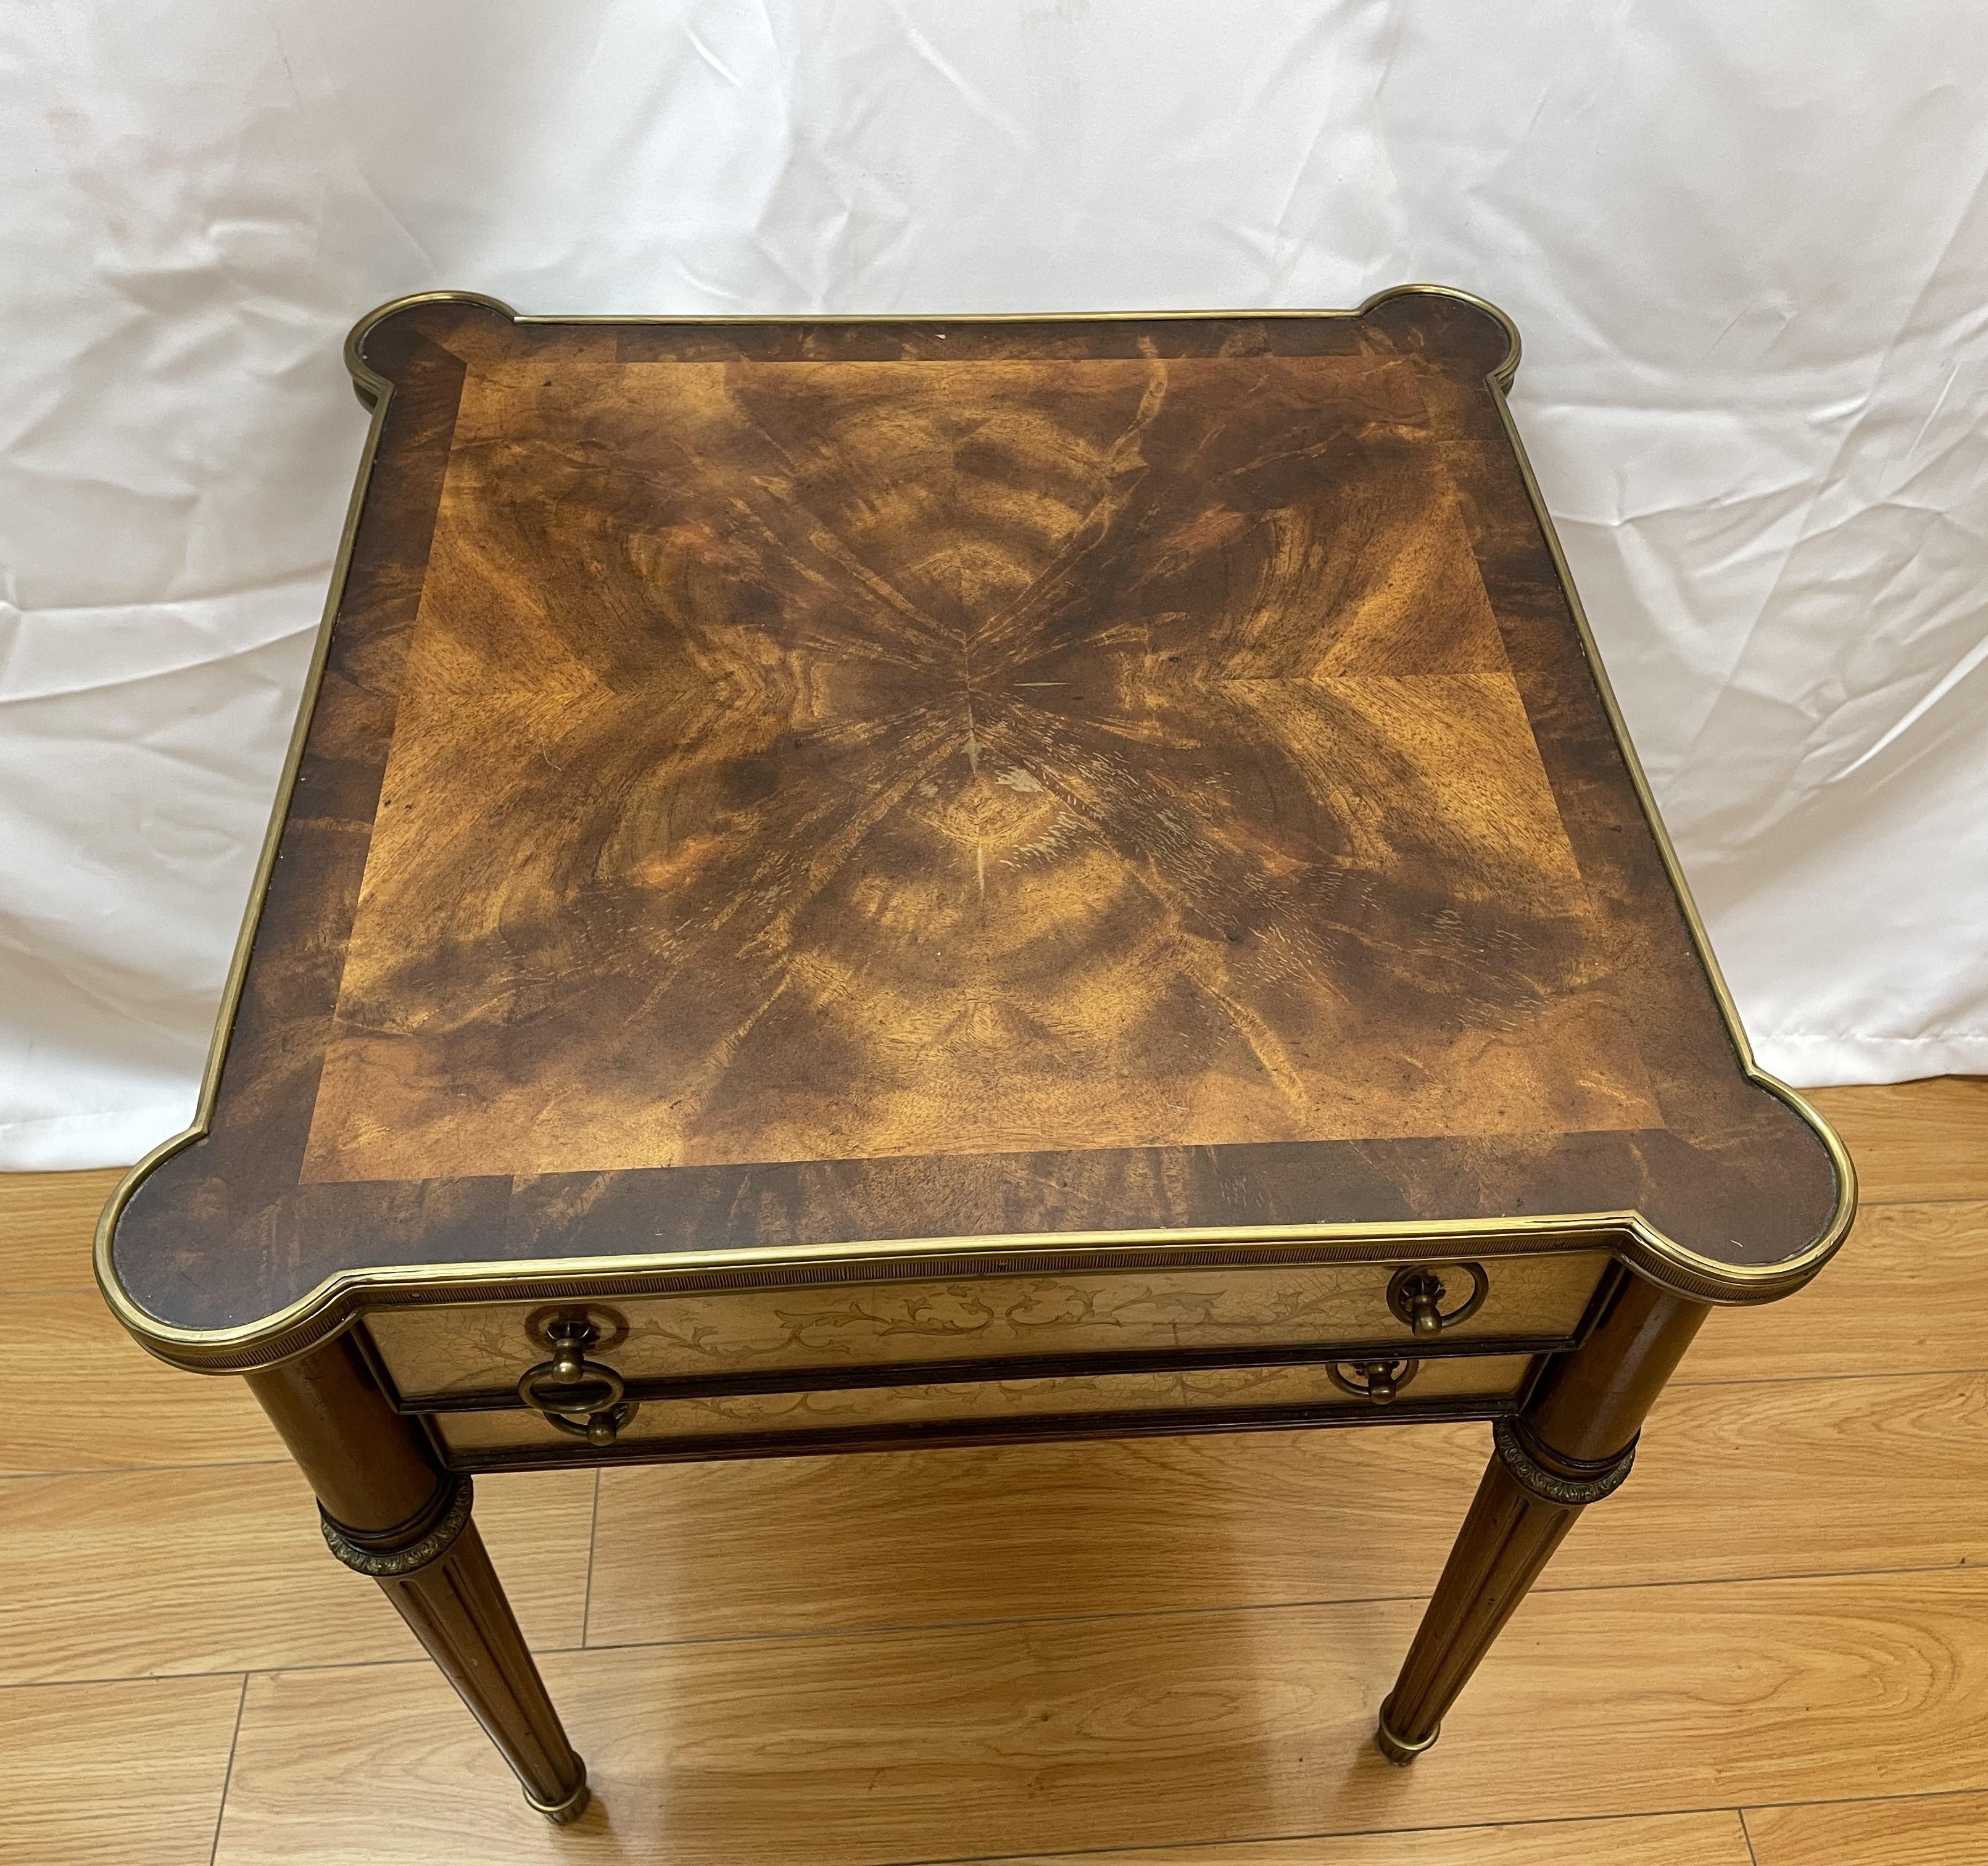 Theodore Alexander Louis XVI style accent table with two draws verse eglomise and brass band surround

24 x 24 x 28